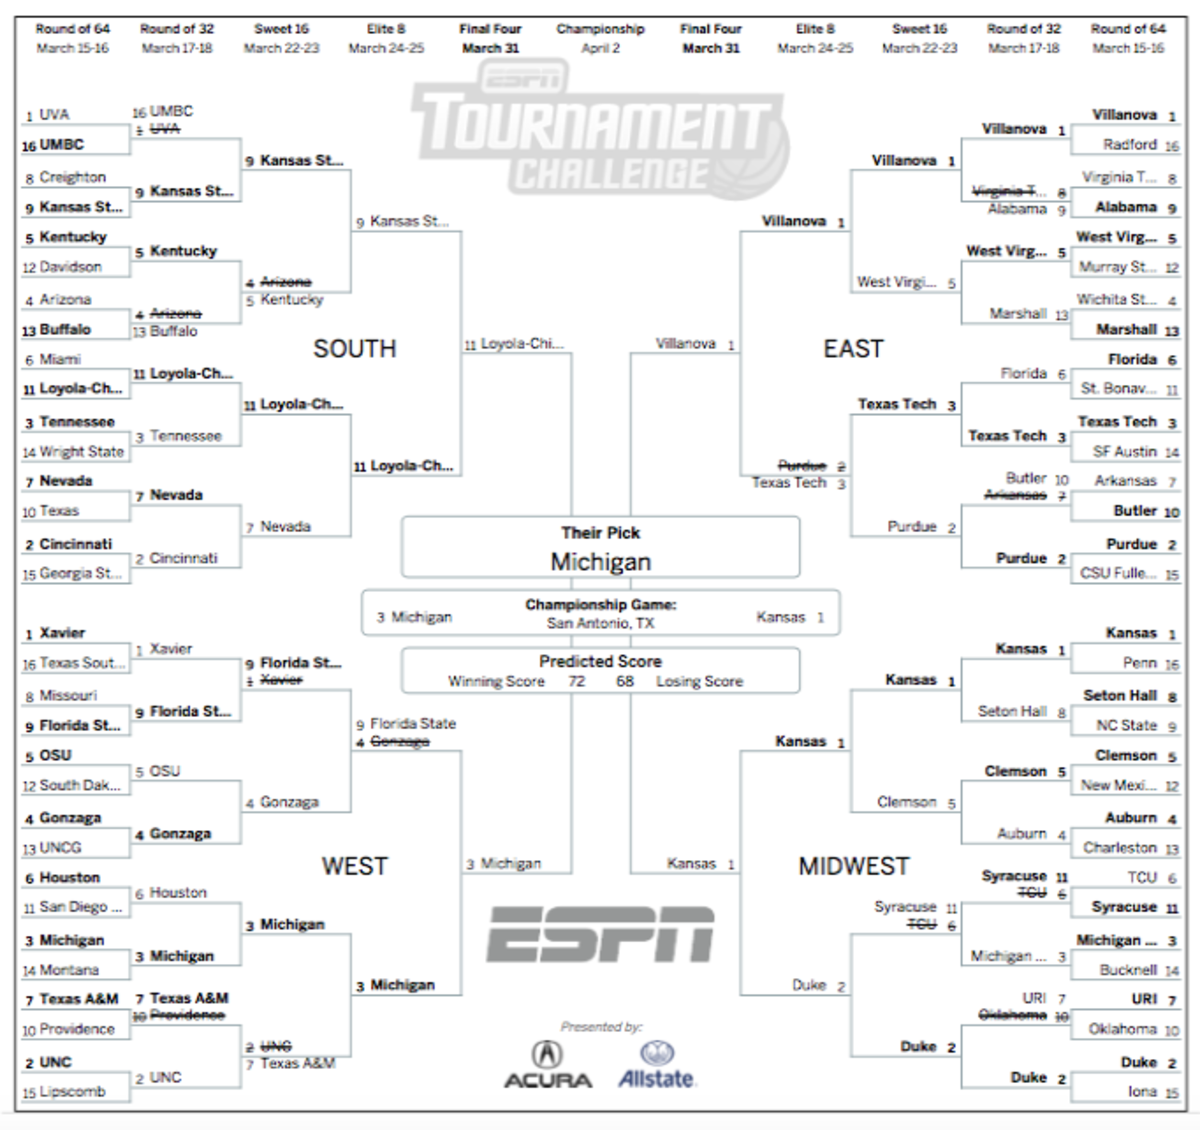 Here is the best bracket in the country for 2018.